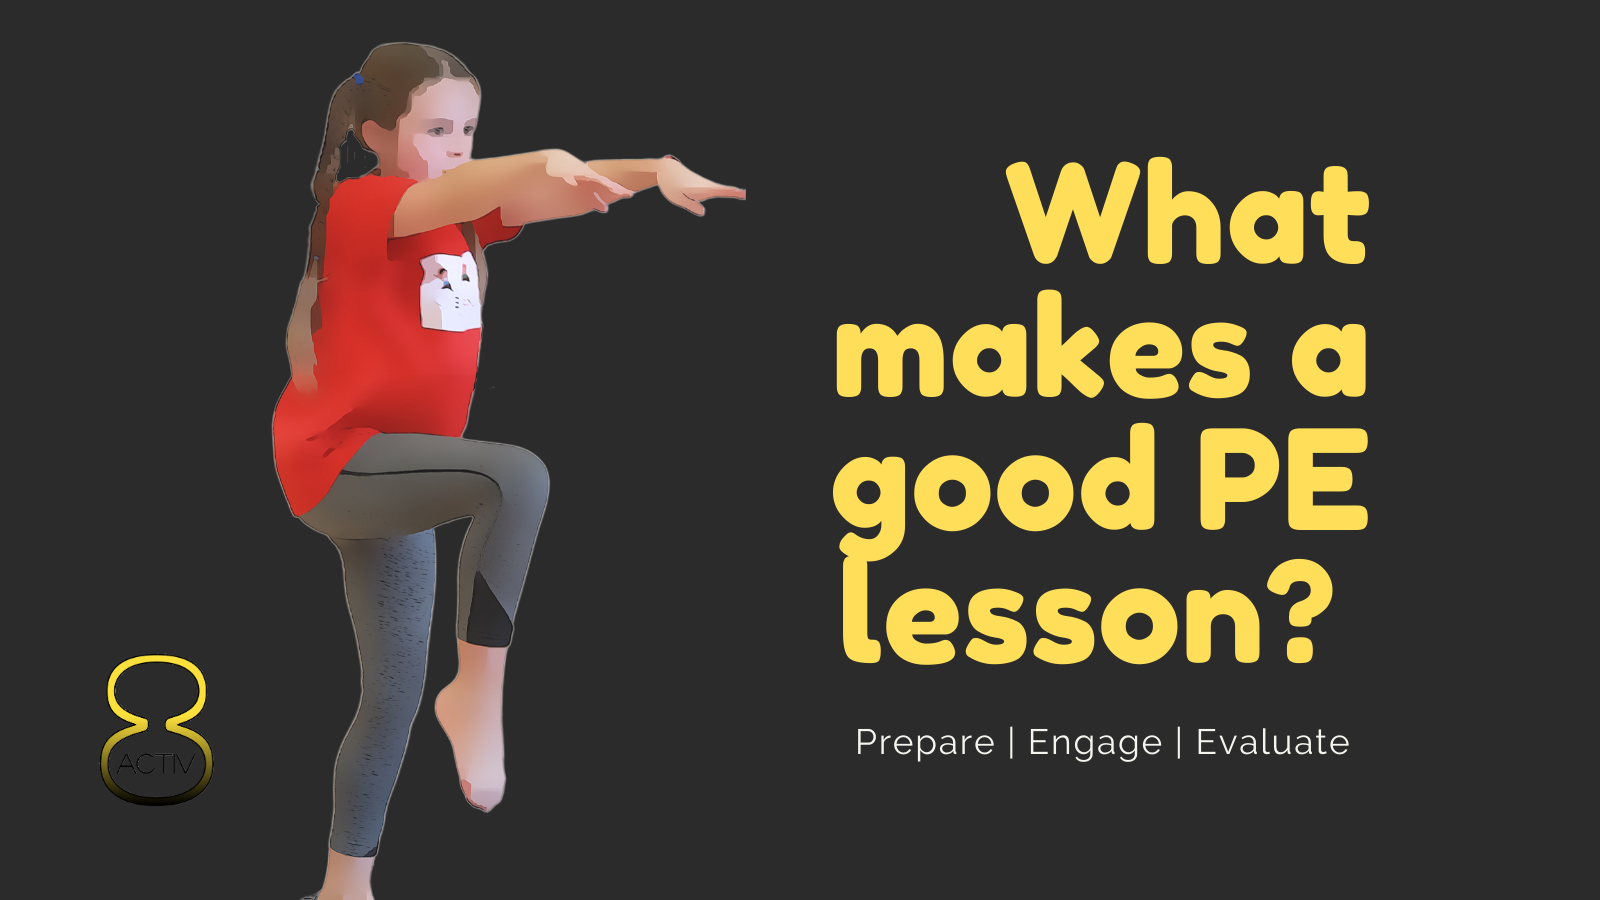 What makes a good PE lesson?